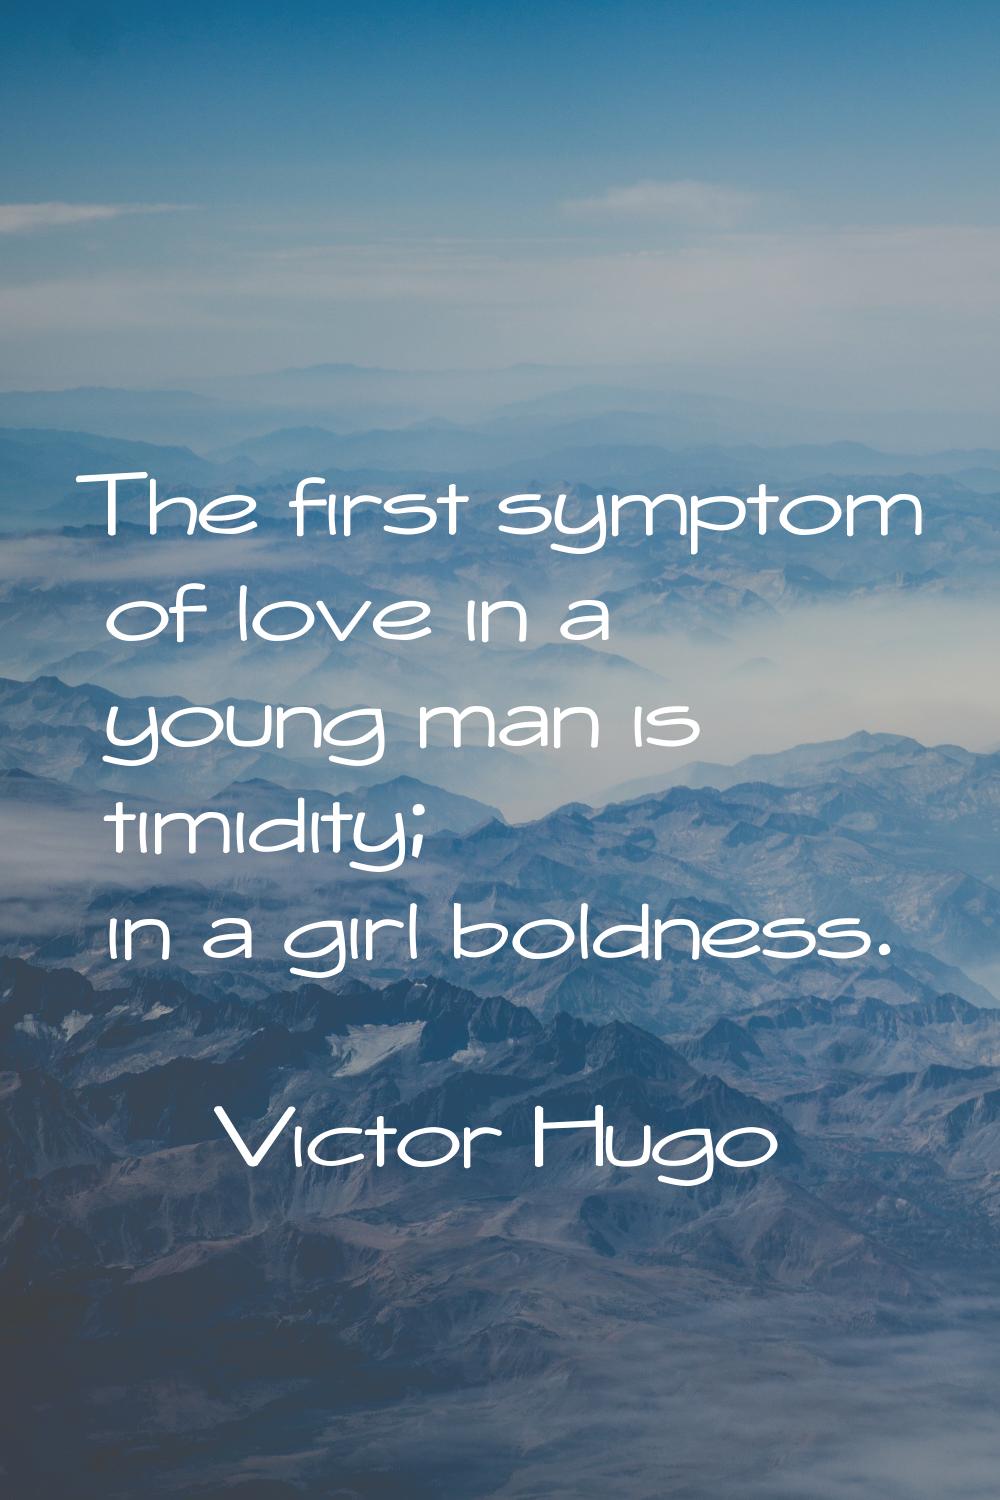 The first symptom of love in a young man is timidity; in a girl boldness.